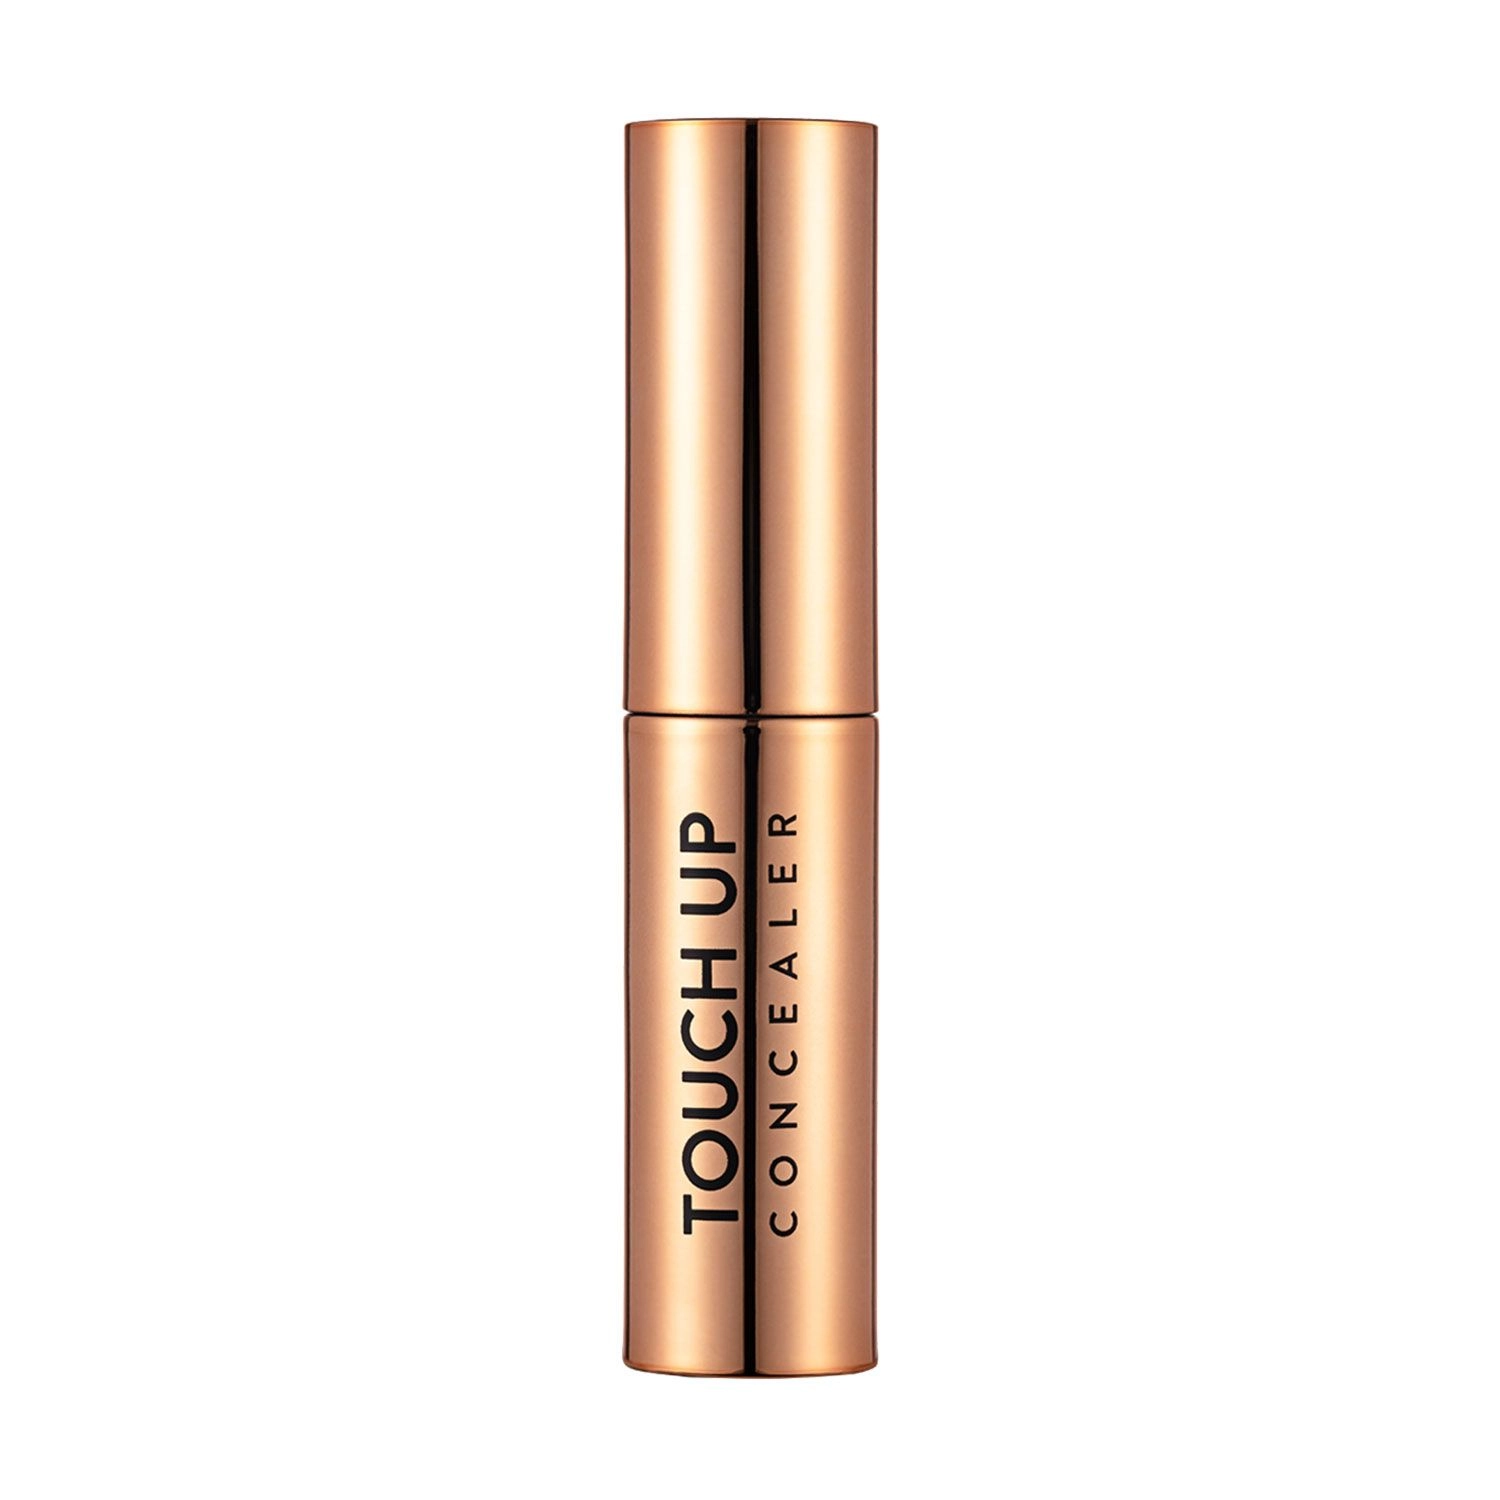 Flormar Консилер-стик для лица Touch Up Concealer 040 Light, 3.5 г - фото N2